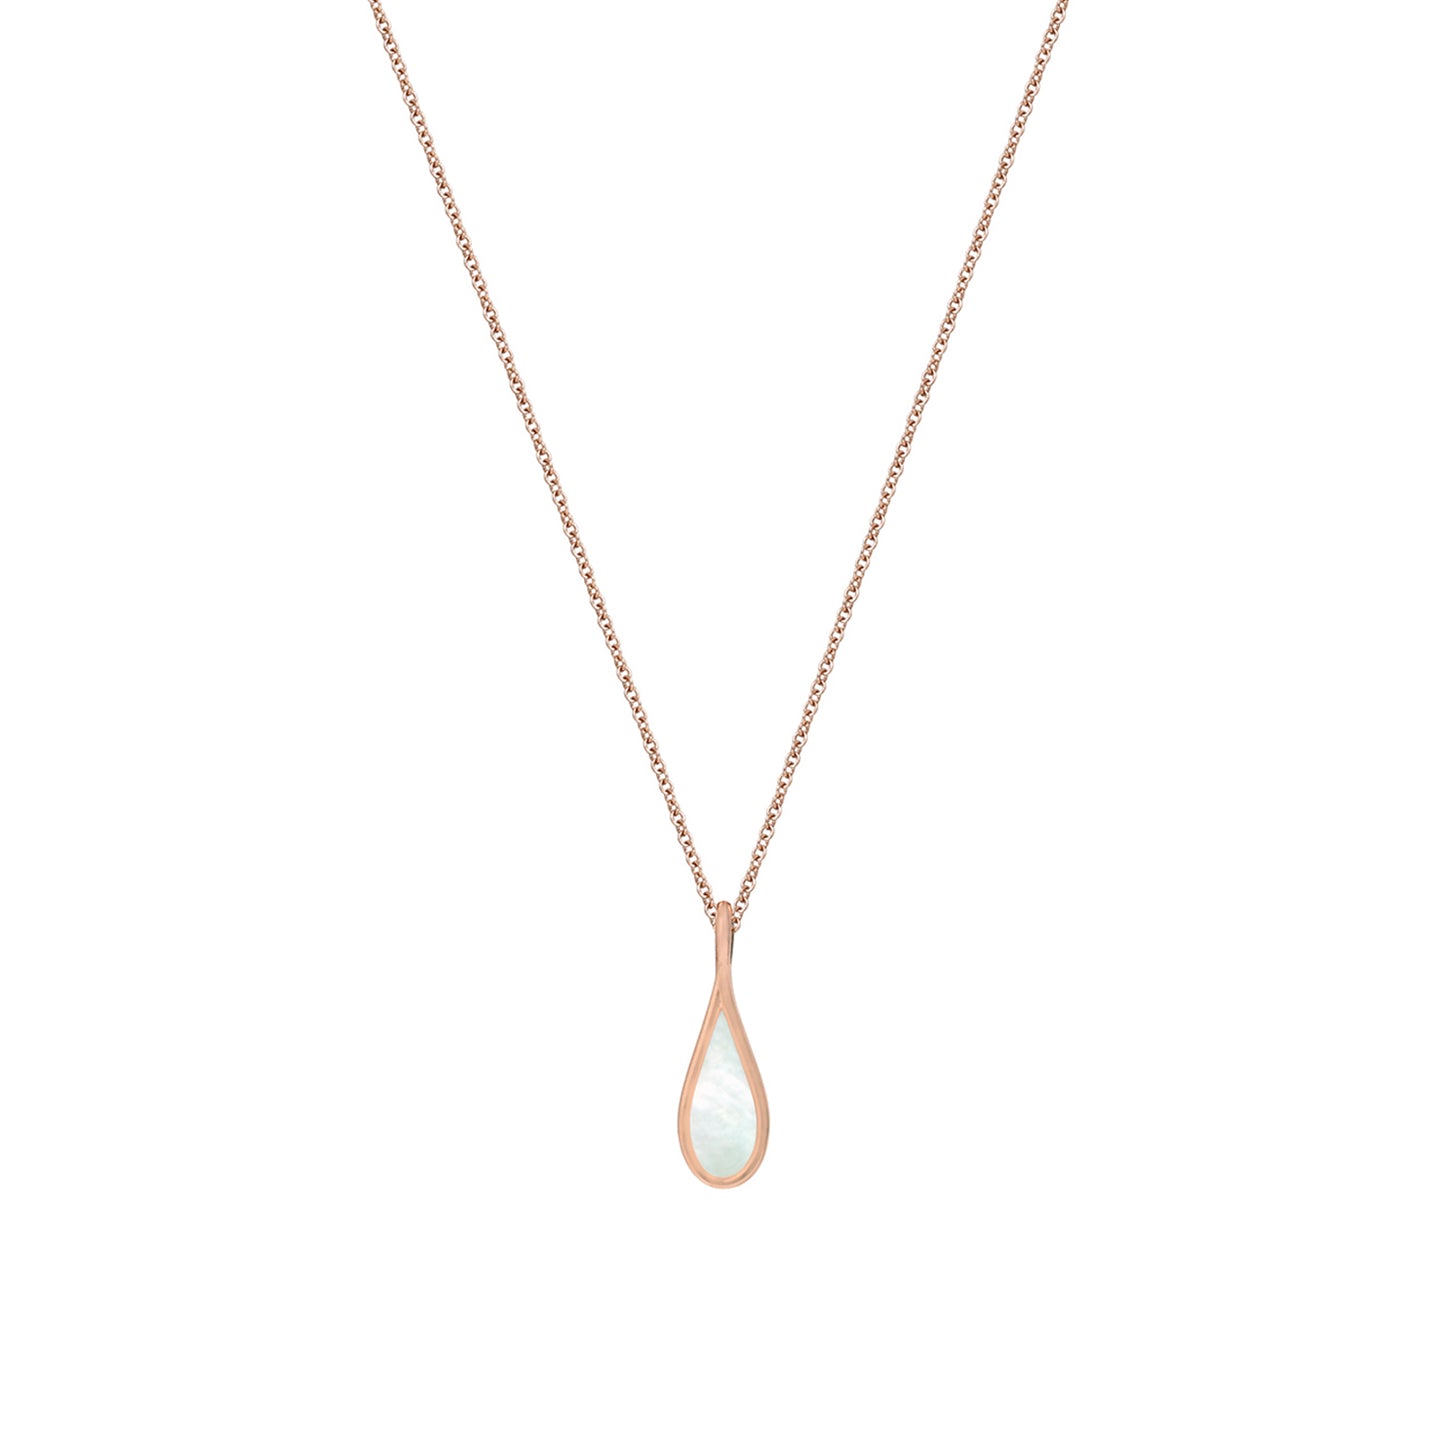 FINAL SALE WaterDrop Mother-of-Pearl Pendant Necklace in Rose Gold